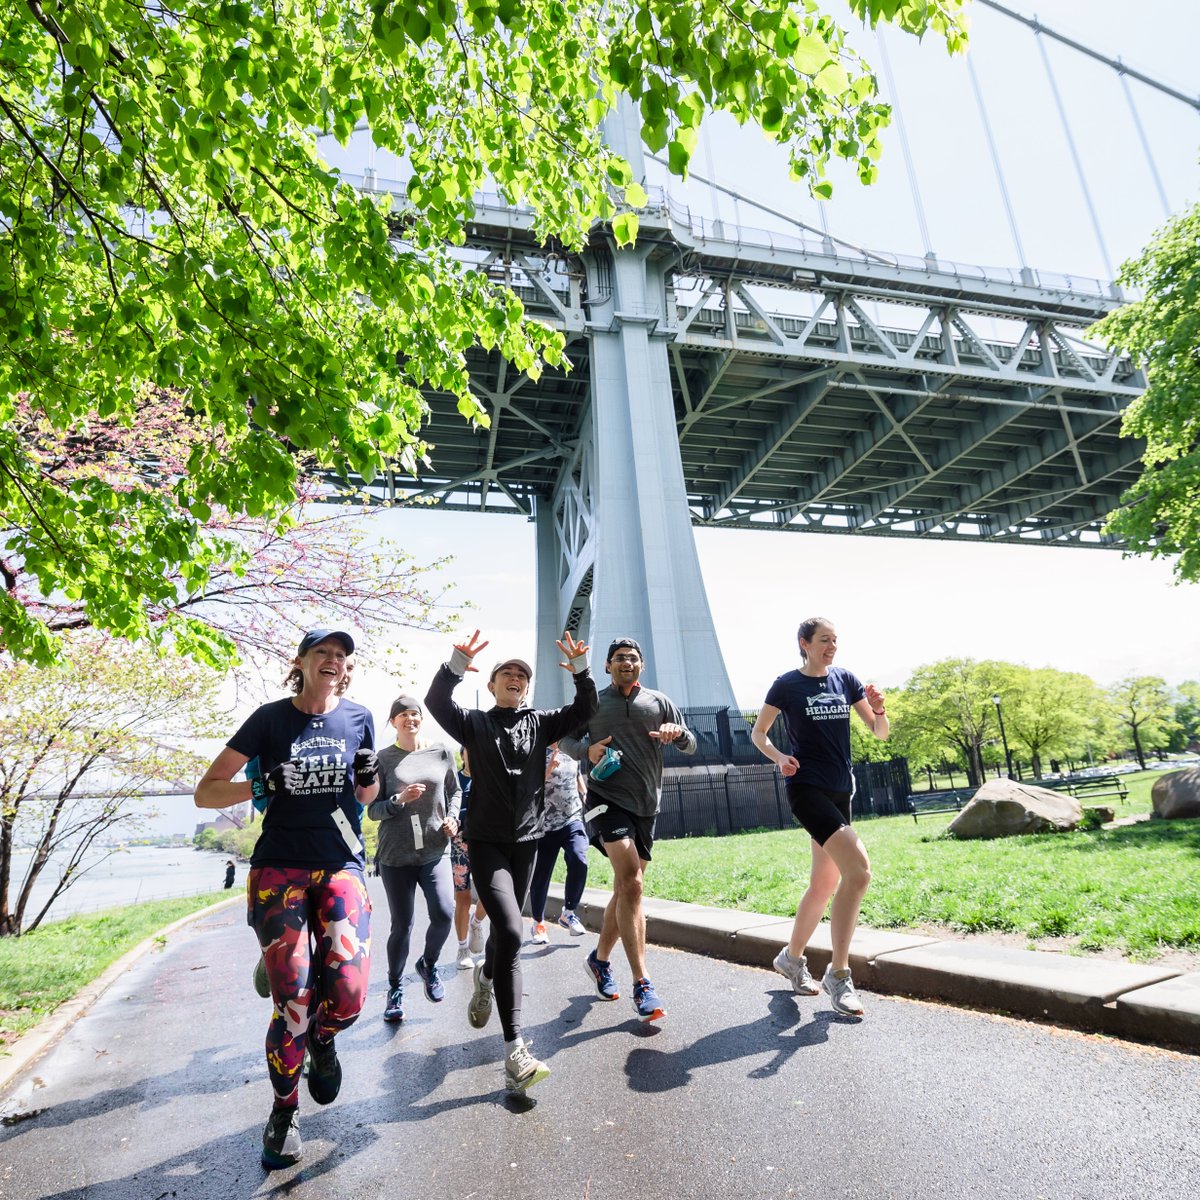 Join us for some FREE summer fun with #NYRROpenRun in Astoria Park! On Saturdays at 9:00 a.m., you can run or walk alongside friends, family, and neighbors in an inviting atmosphere. 🥳☀️ Sign up today, all are welcome🤗: bit.ly/3NkANOo